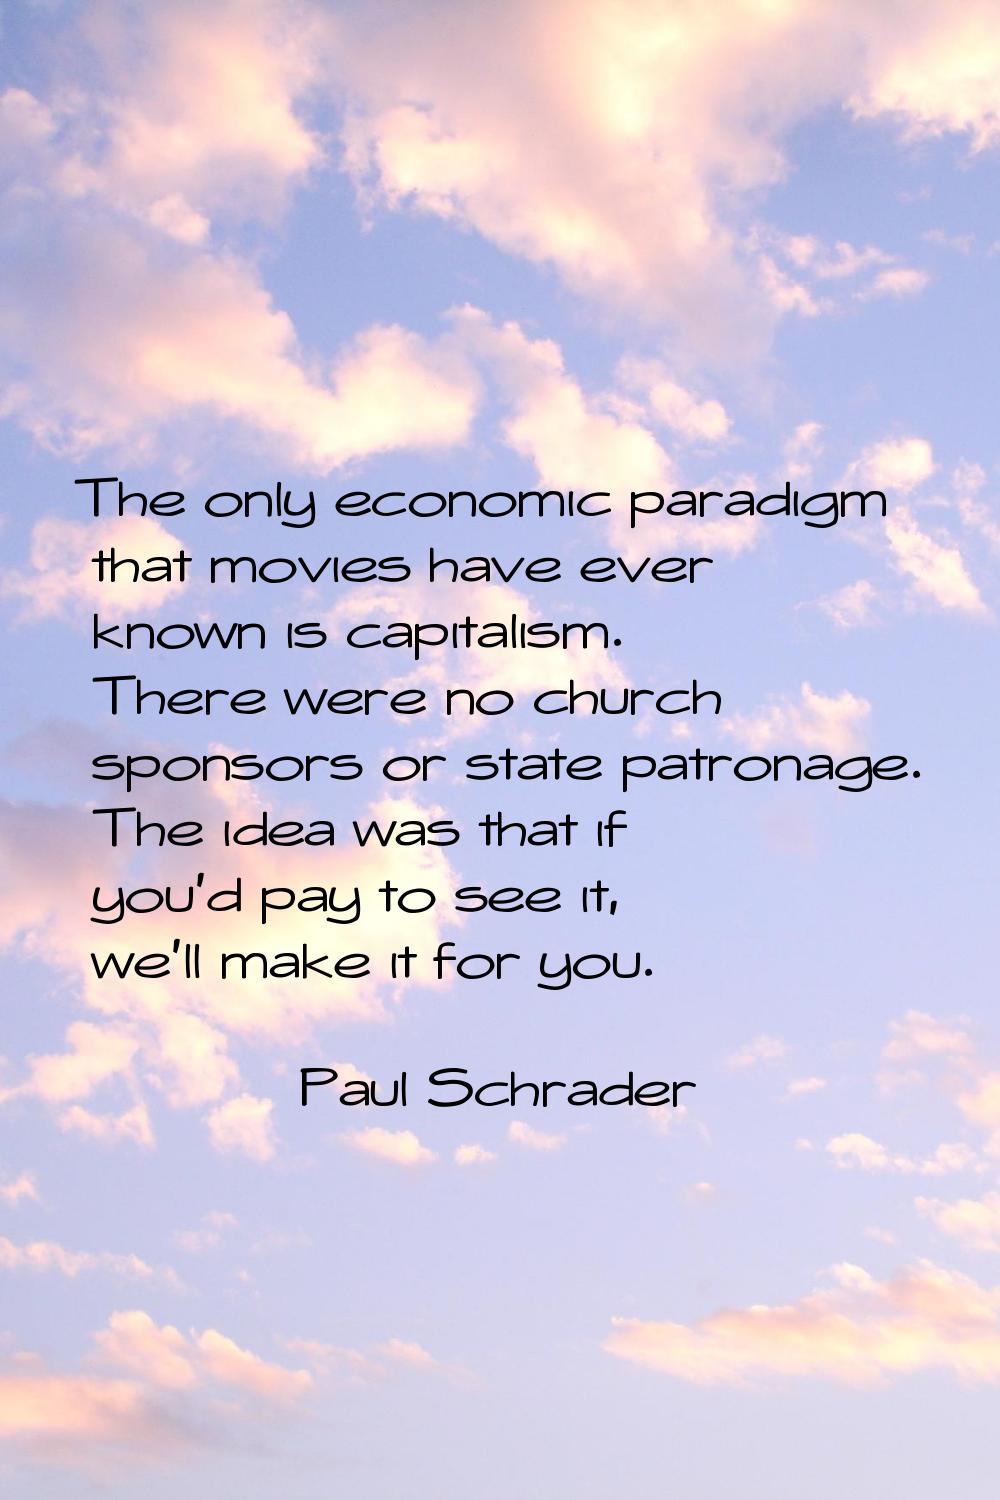 The only economic paradigm that movies have ever known is capitalism. There were no church sponsors